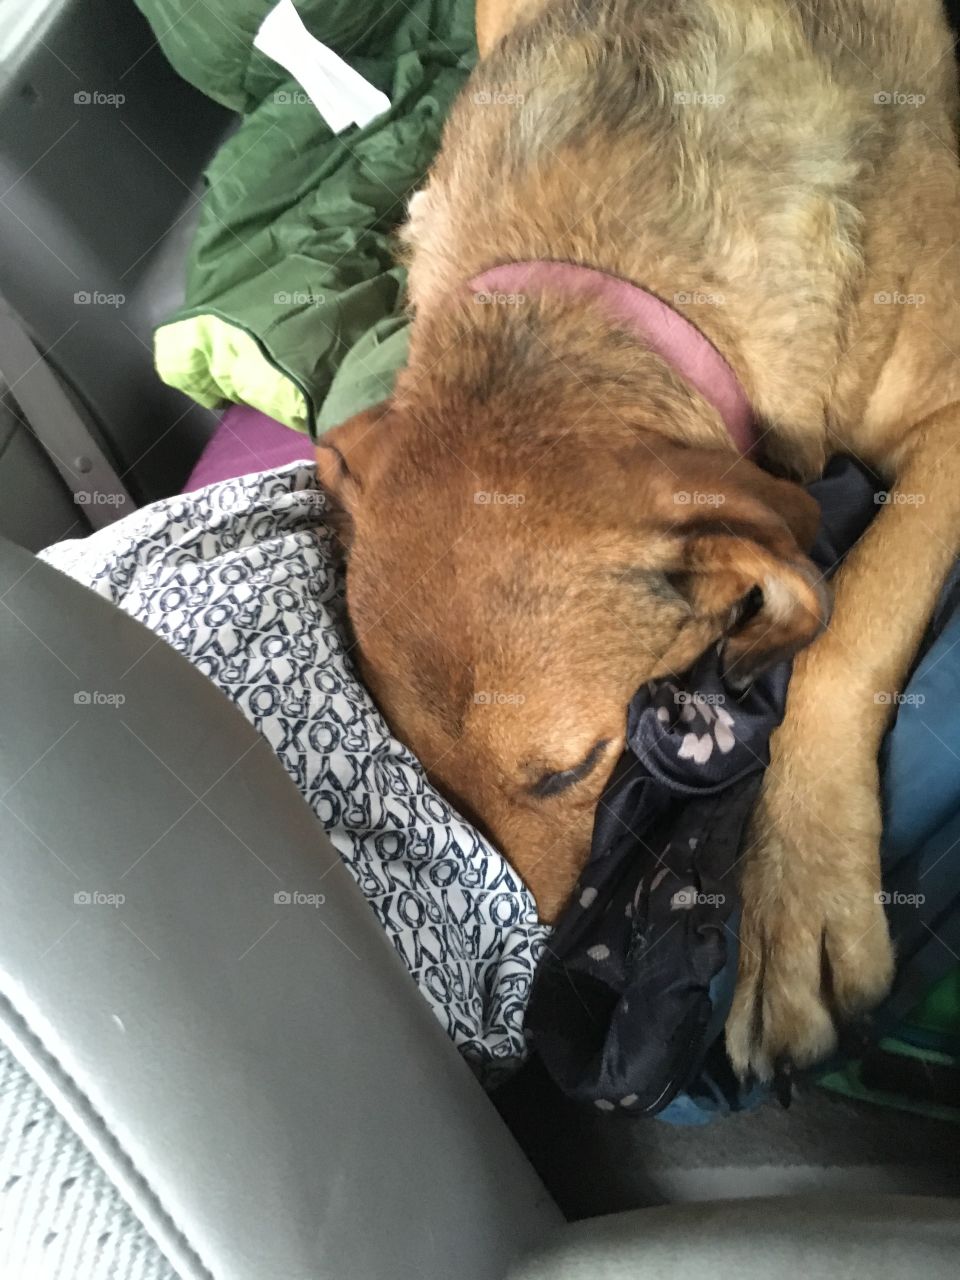 I get the best car ride best out of anyone I know! I love to bury my head in the blankets and pillows well we travel to fun places. 